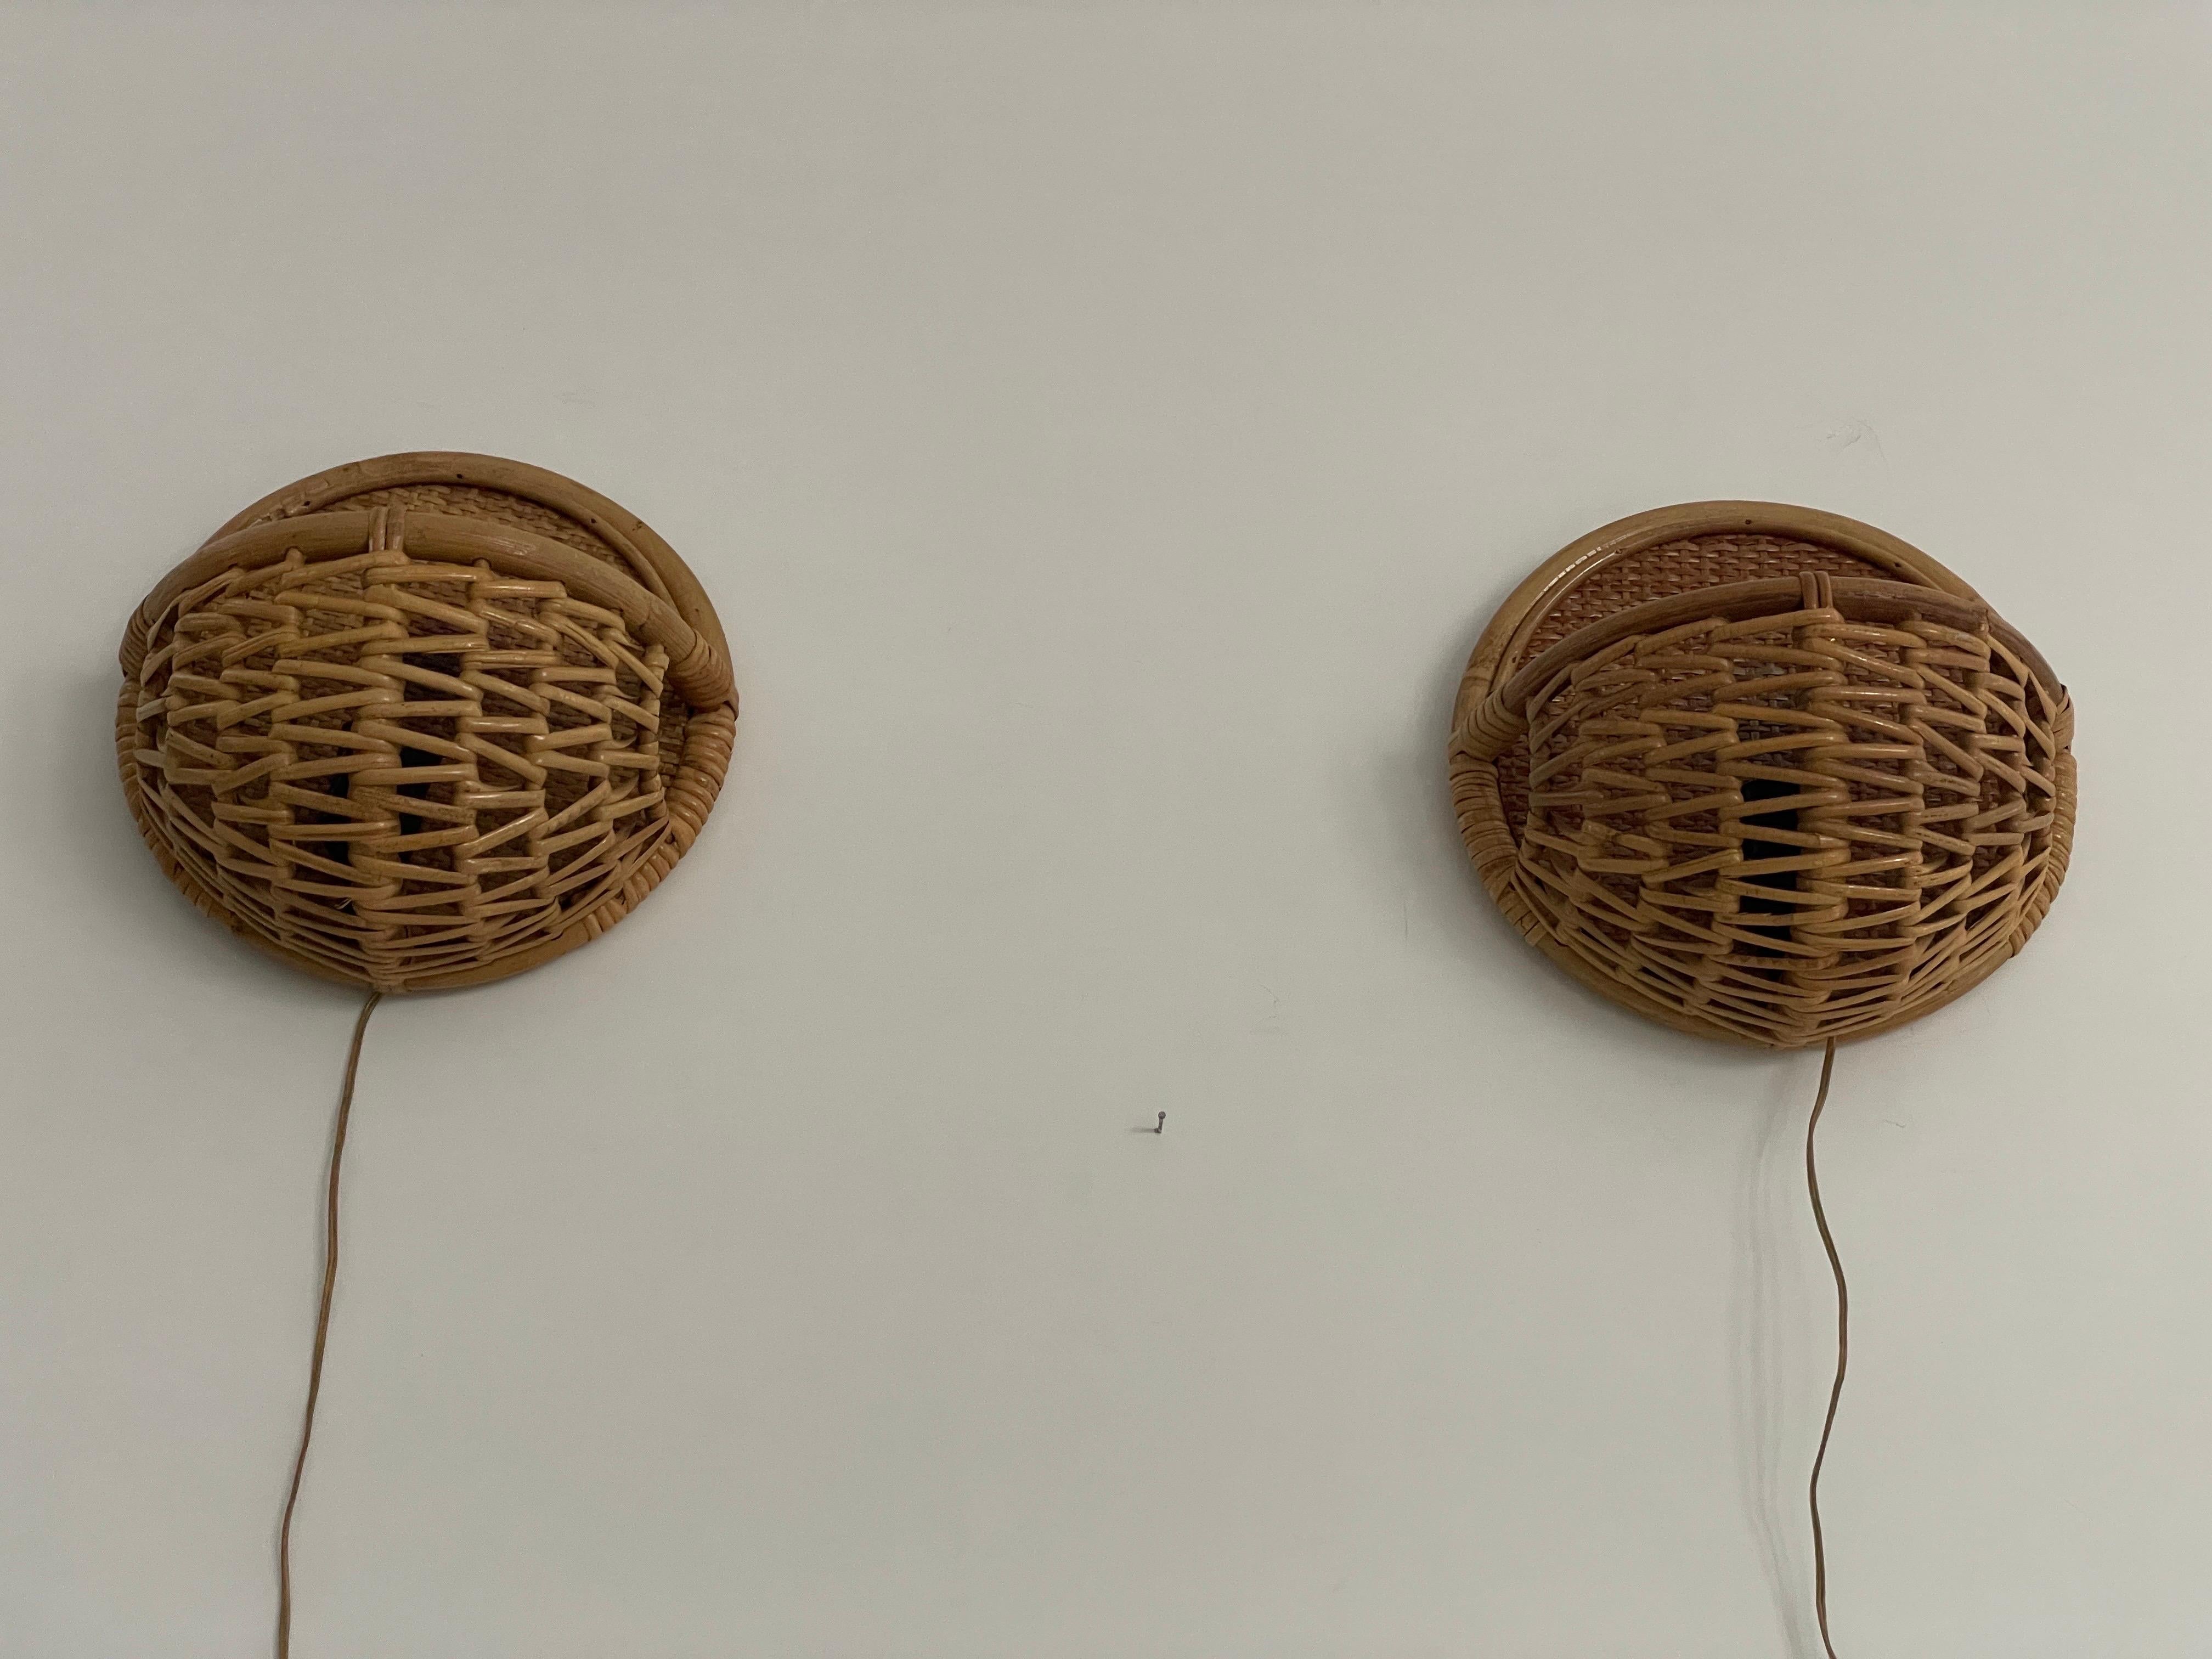 Wicker and Bamboo Round Design Pair of Wall Lamps, 1950s, Italy In Excellent Condition For Sale In Hagenbach, DE